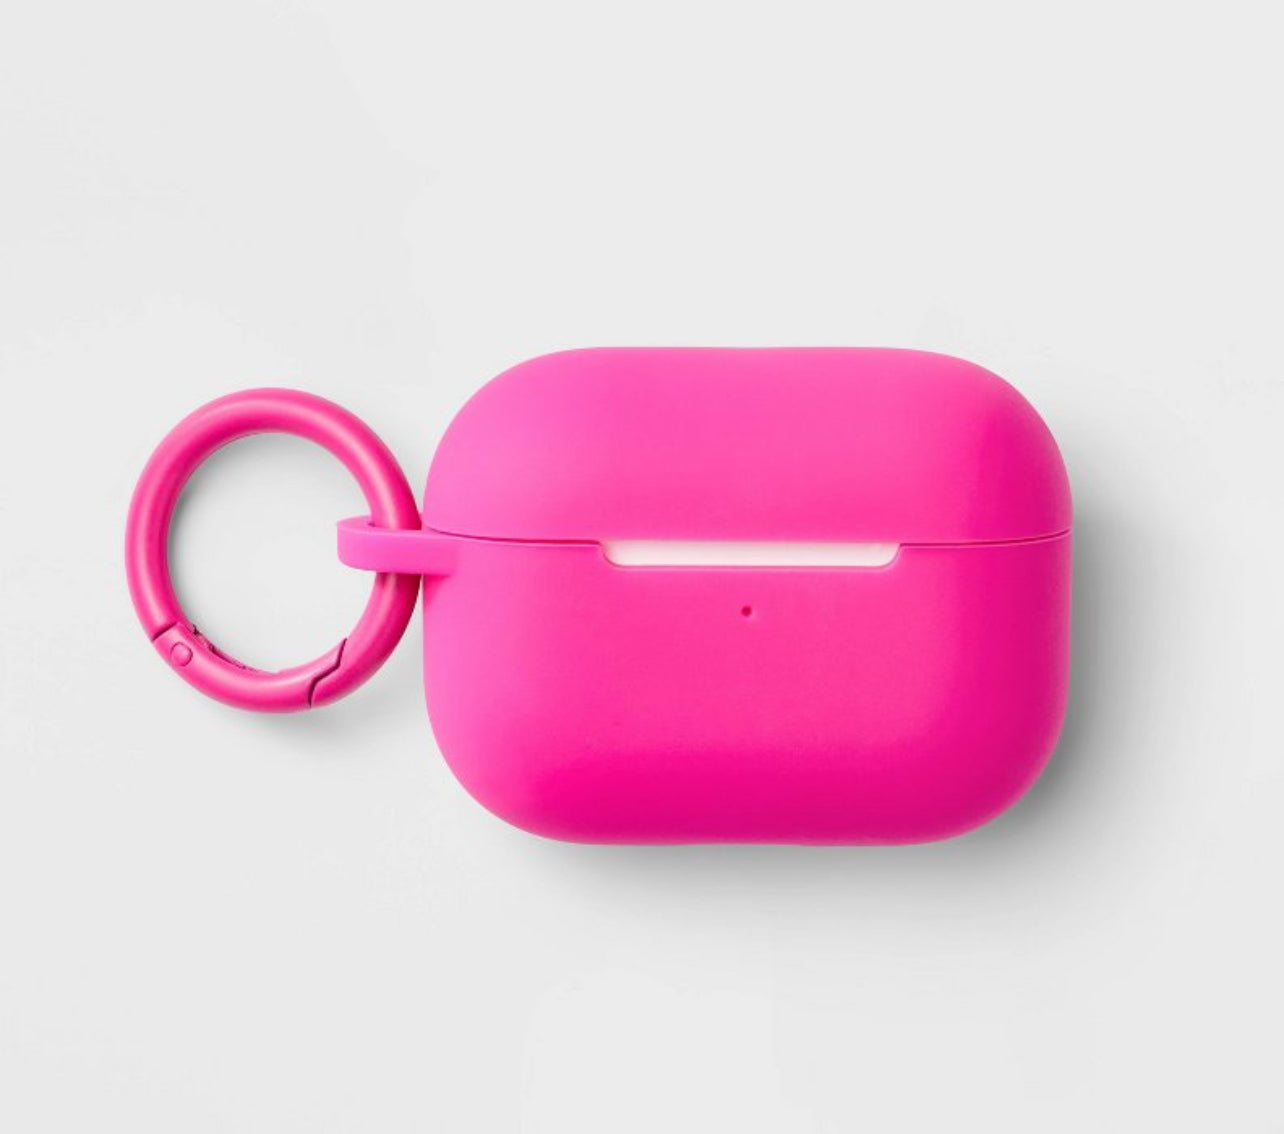 Apple AirPod PRO Gen 1&2 Case with Clip - heyday™ Pink